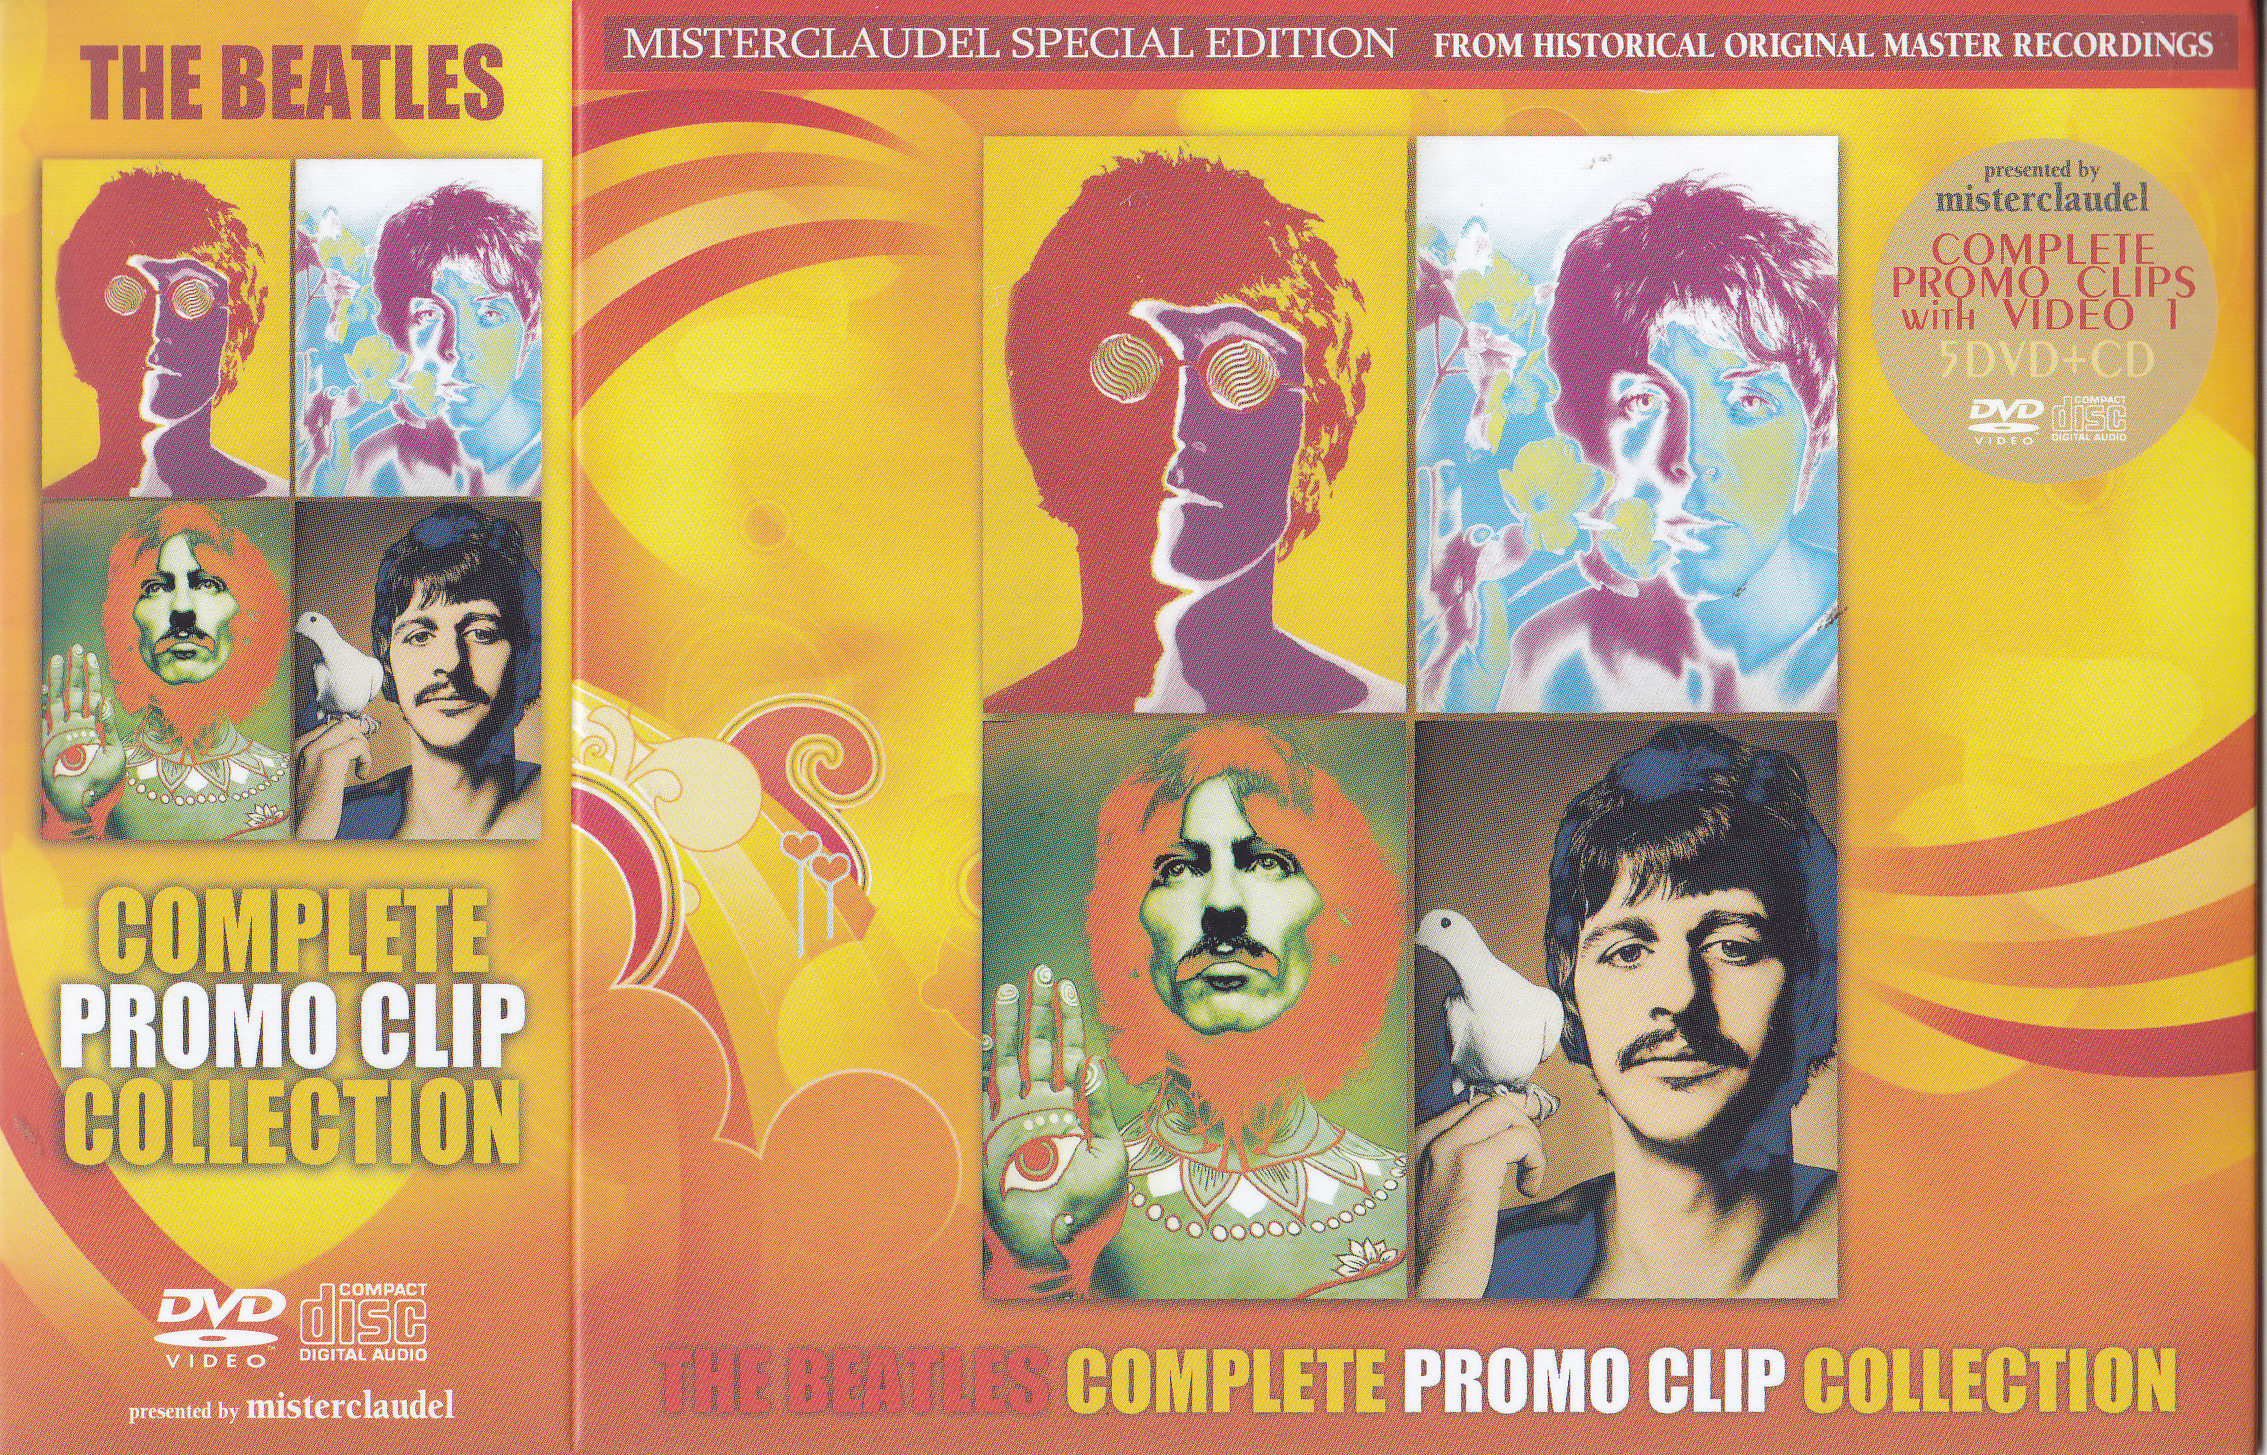 Beatles / Complete Promo Clip Collection / 5DVD+1CD Wx Slipcase